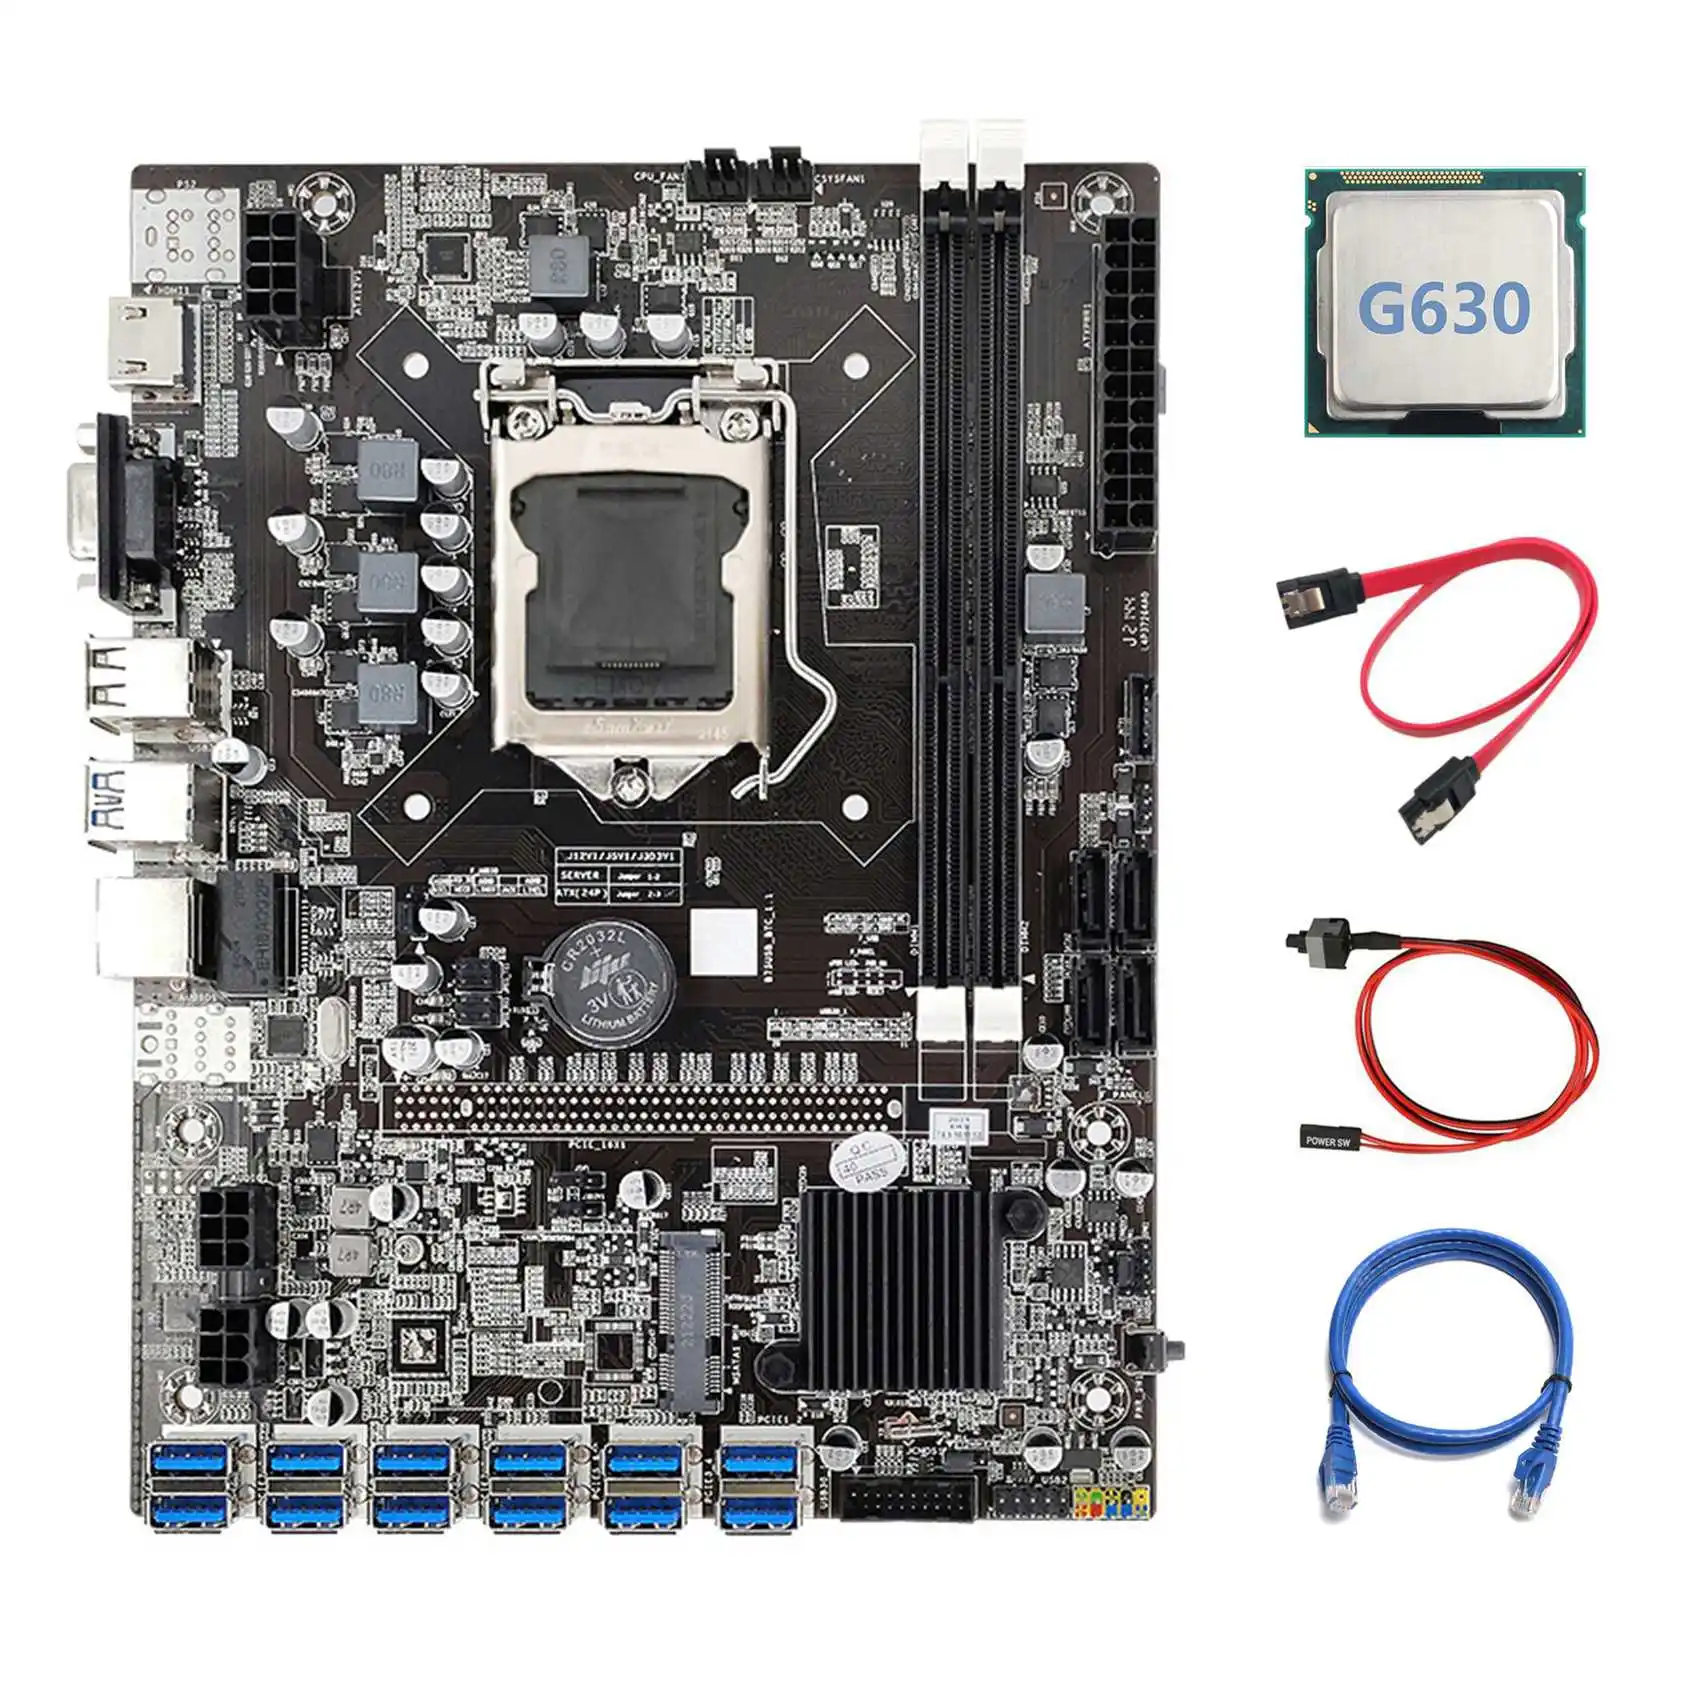 B75 ETH Miner Motherboard 12 PCIE to USB3.0+G630 CPU+RJ45 Network Cable+SATA Cable+Switch Cable LGA1155 Motherboard